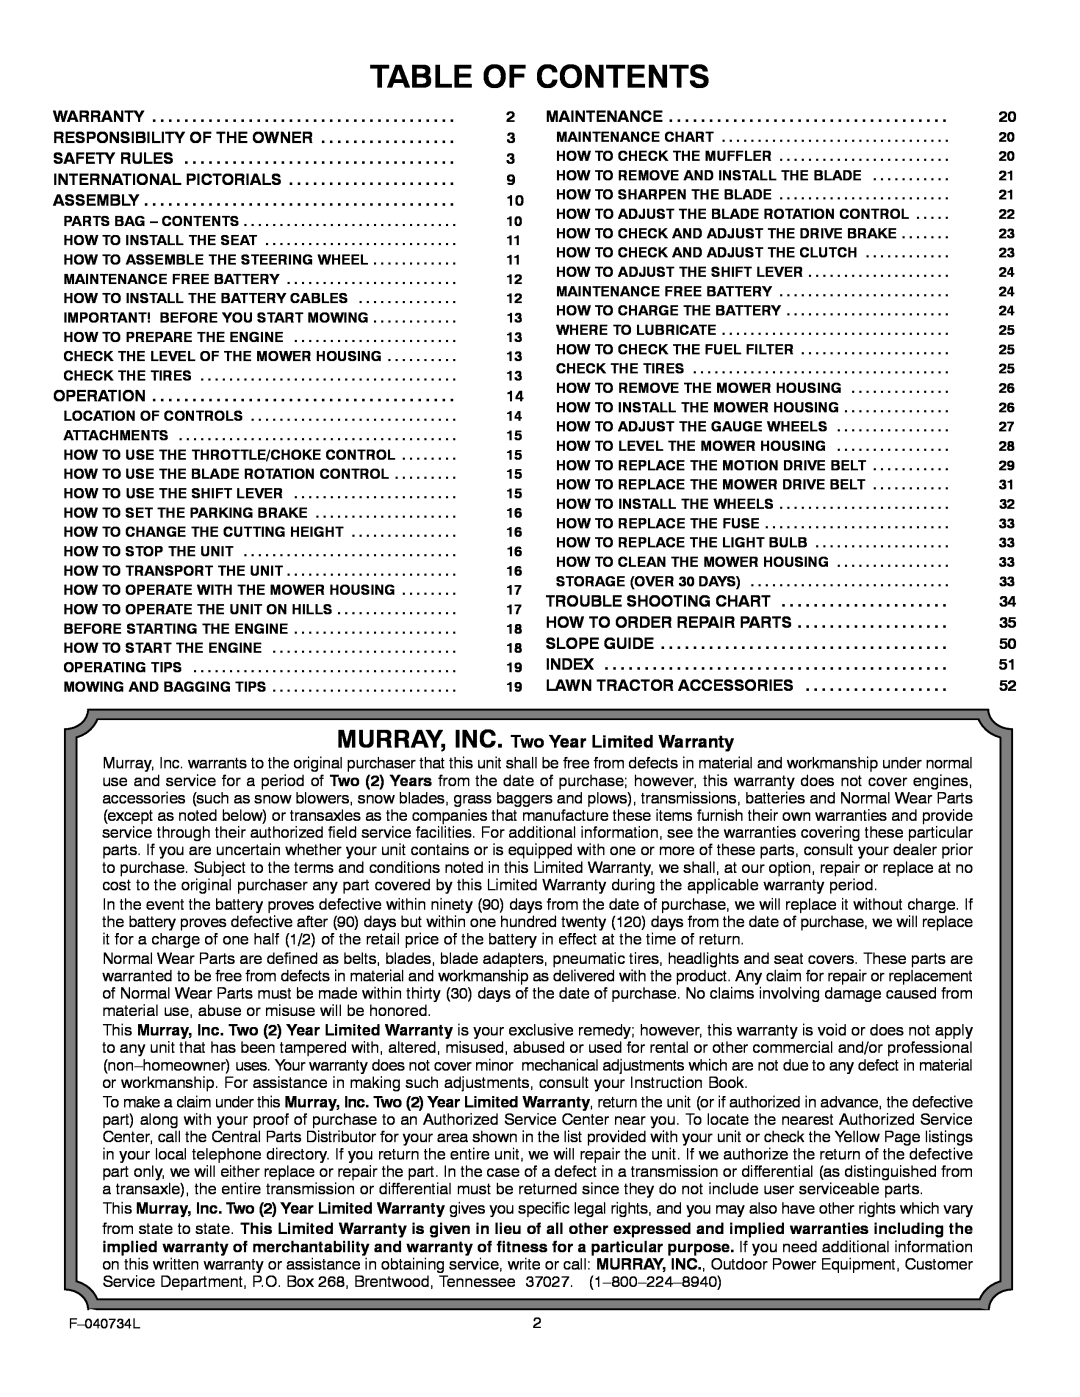 Murray 425015x92A manual Table Of Contents, MURRAY, INC. Two Year Limited Warranty 